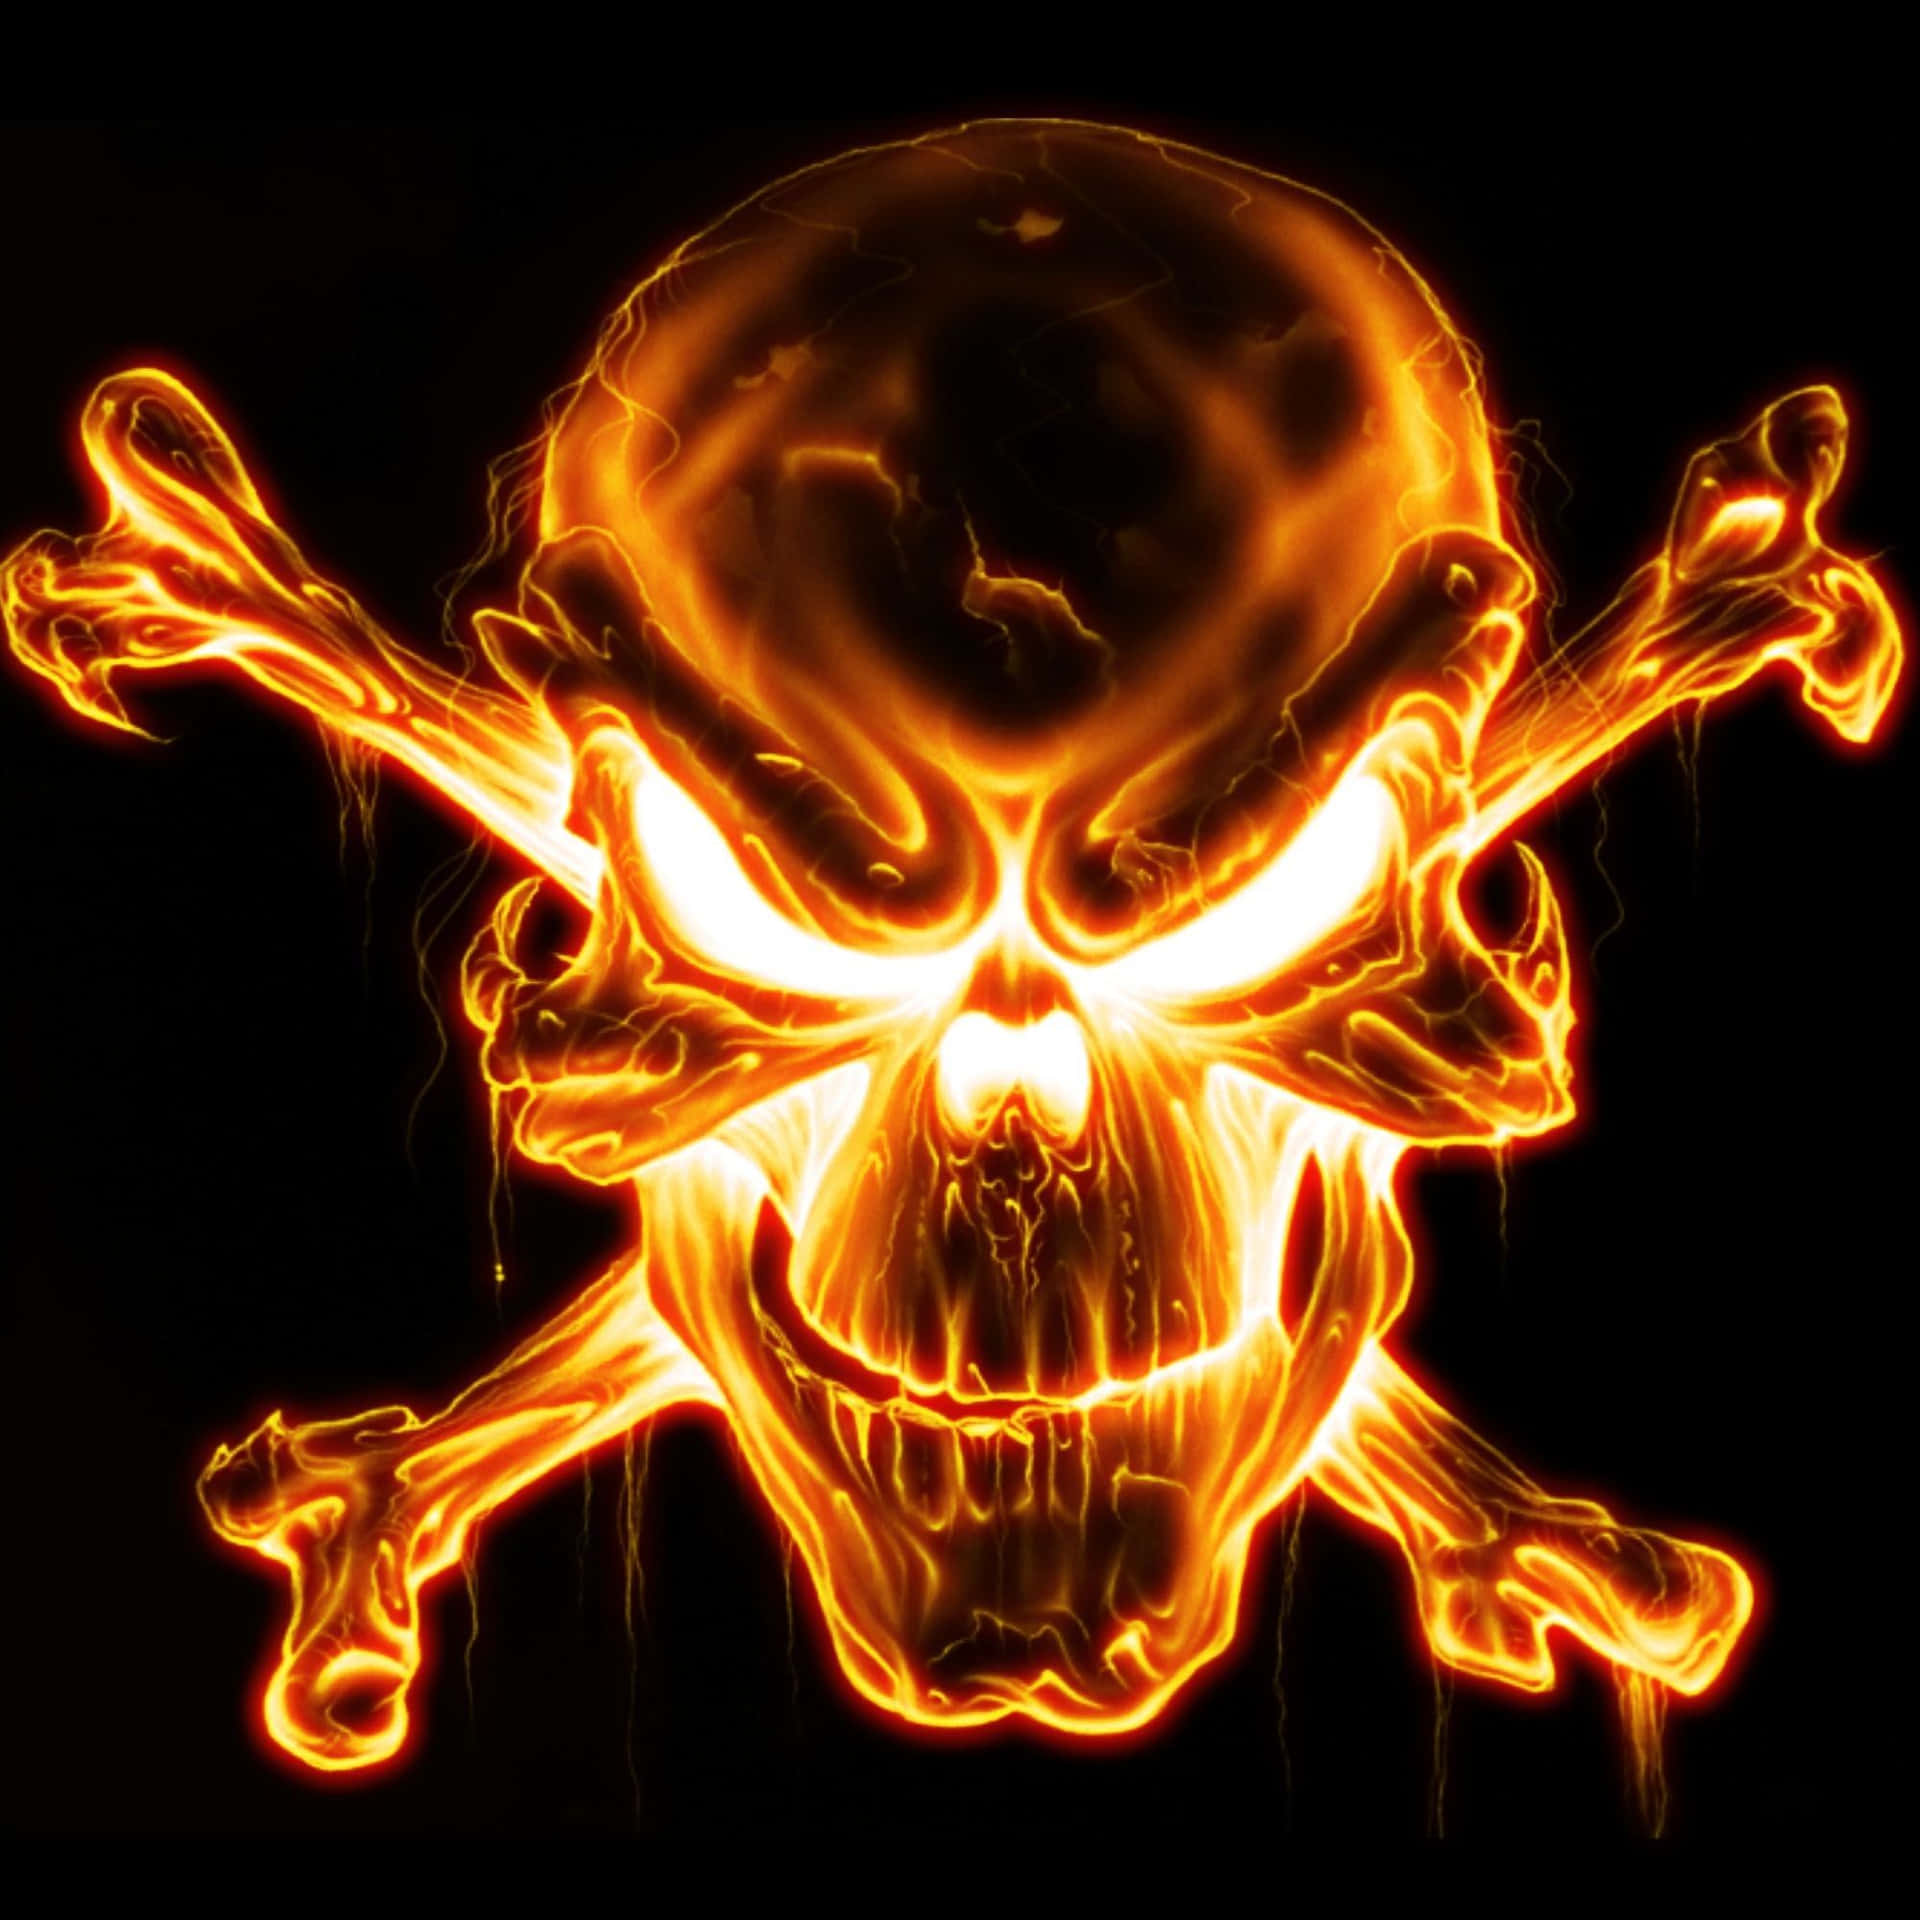 Download A Skull With Flames And Crossbones On A Black Background Wallpaper